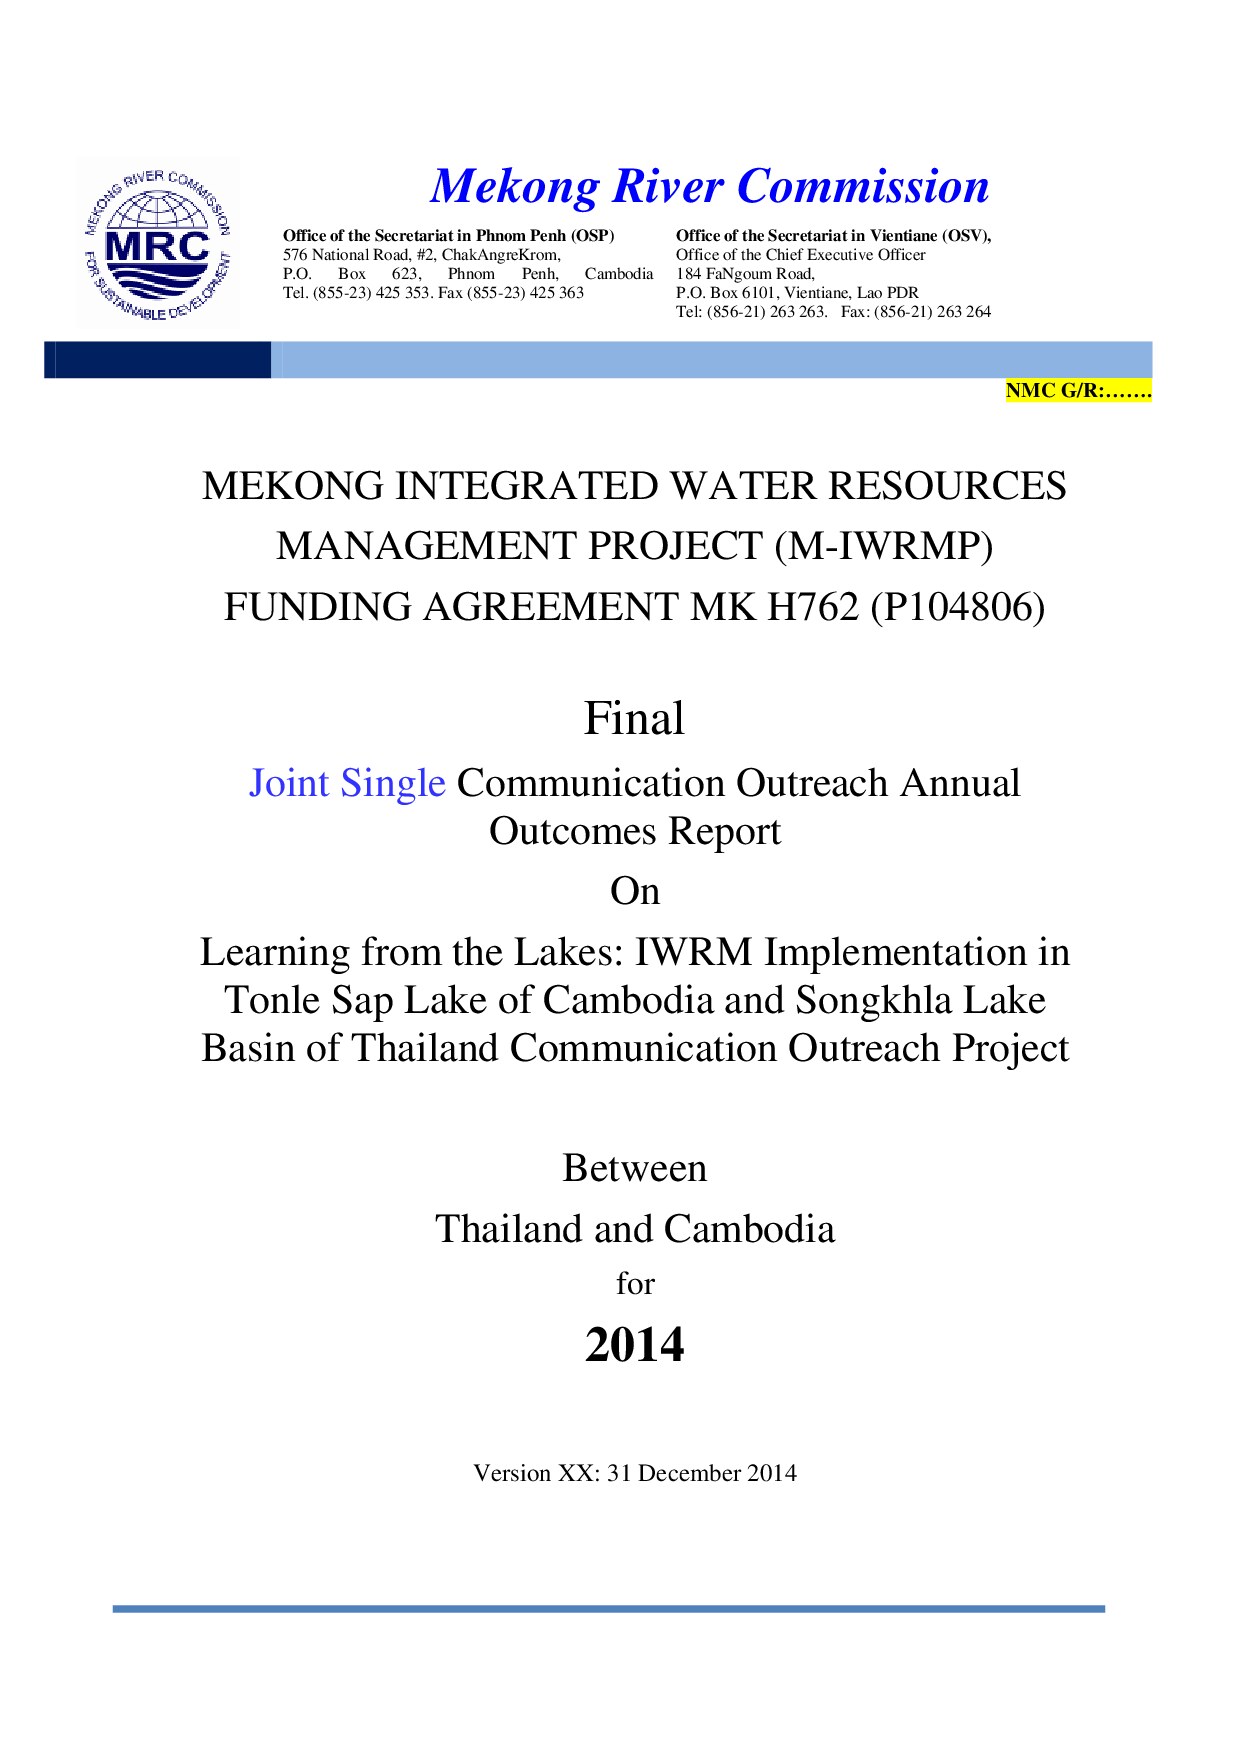 MEKONG INTEGRATED WATER RESOURCES MANAGEMENT PROJECT (M-IWRMP) FUNDING AGREEMENT MK H762 (P104806)